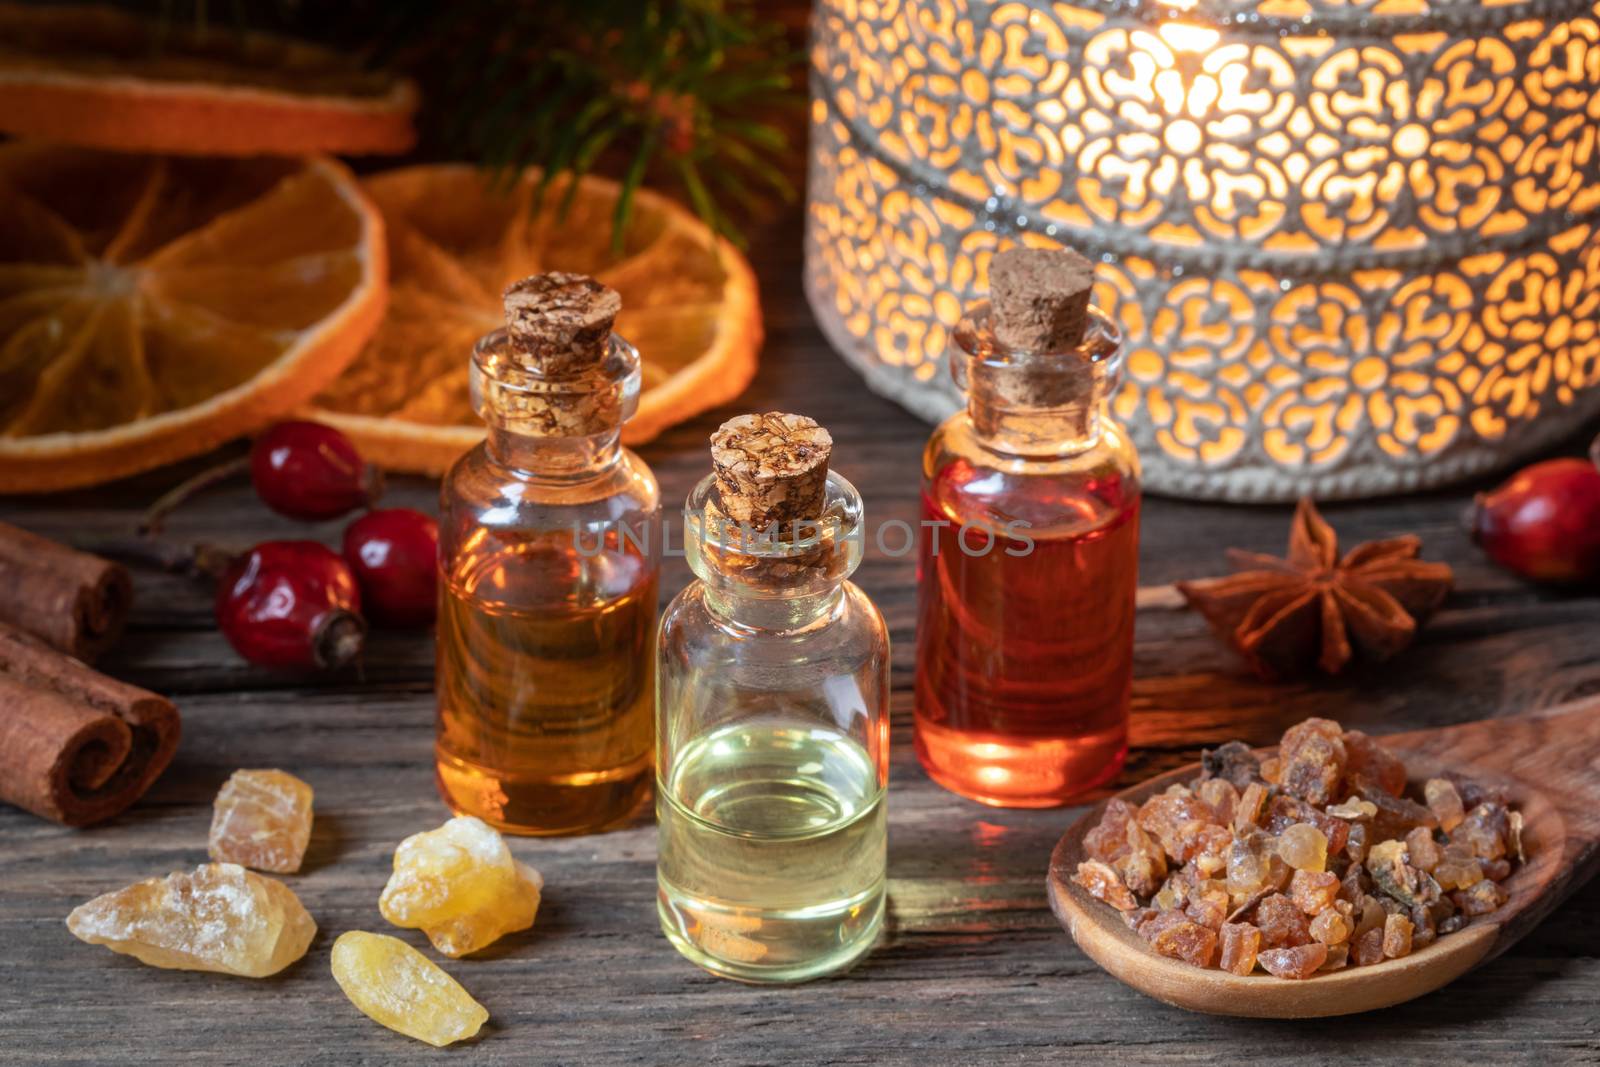 Christmas collection of essential oils with frankincense, myrrh, winter spices and dried orange slices